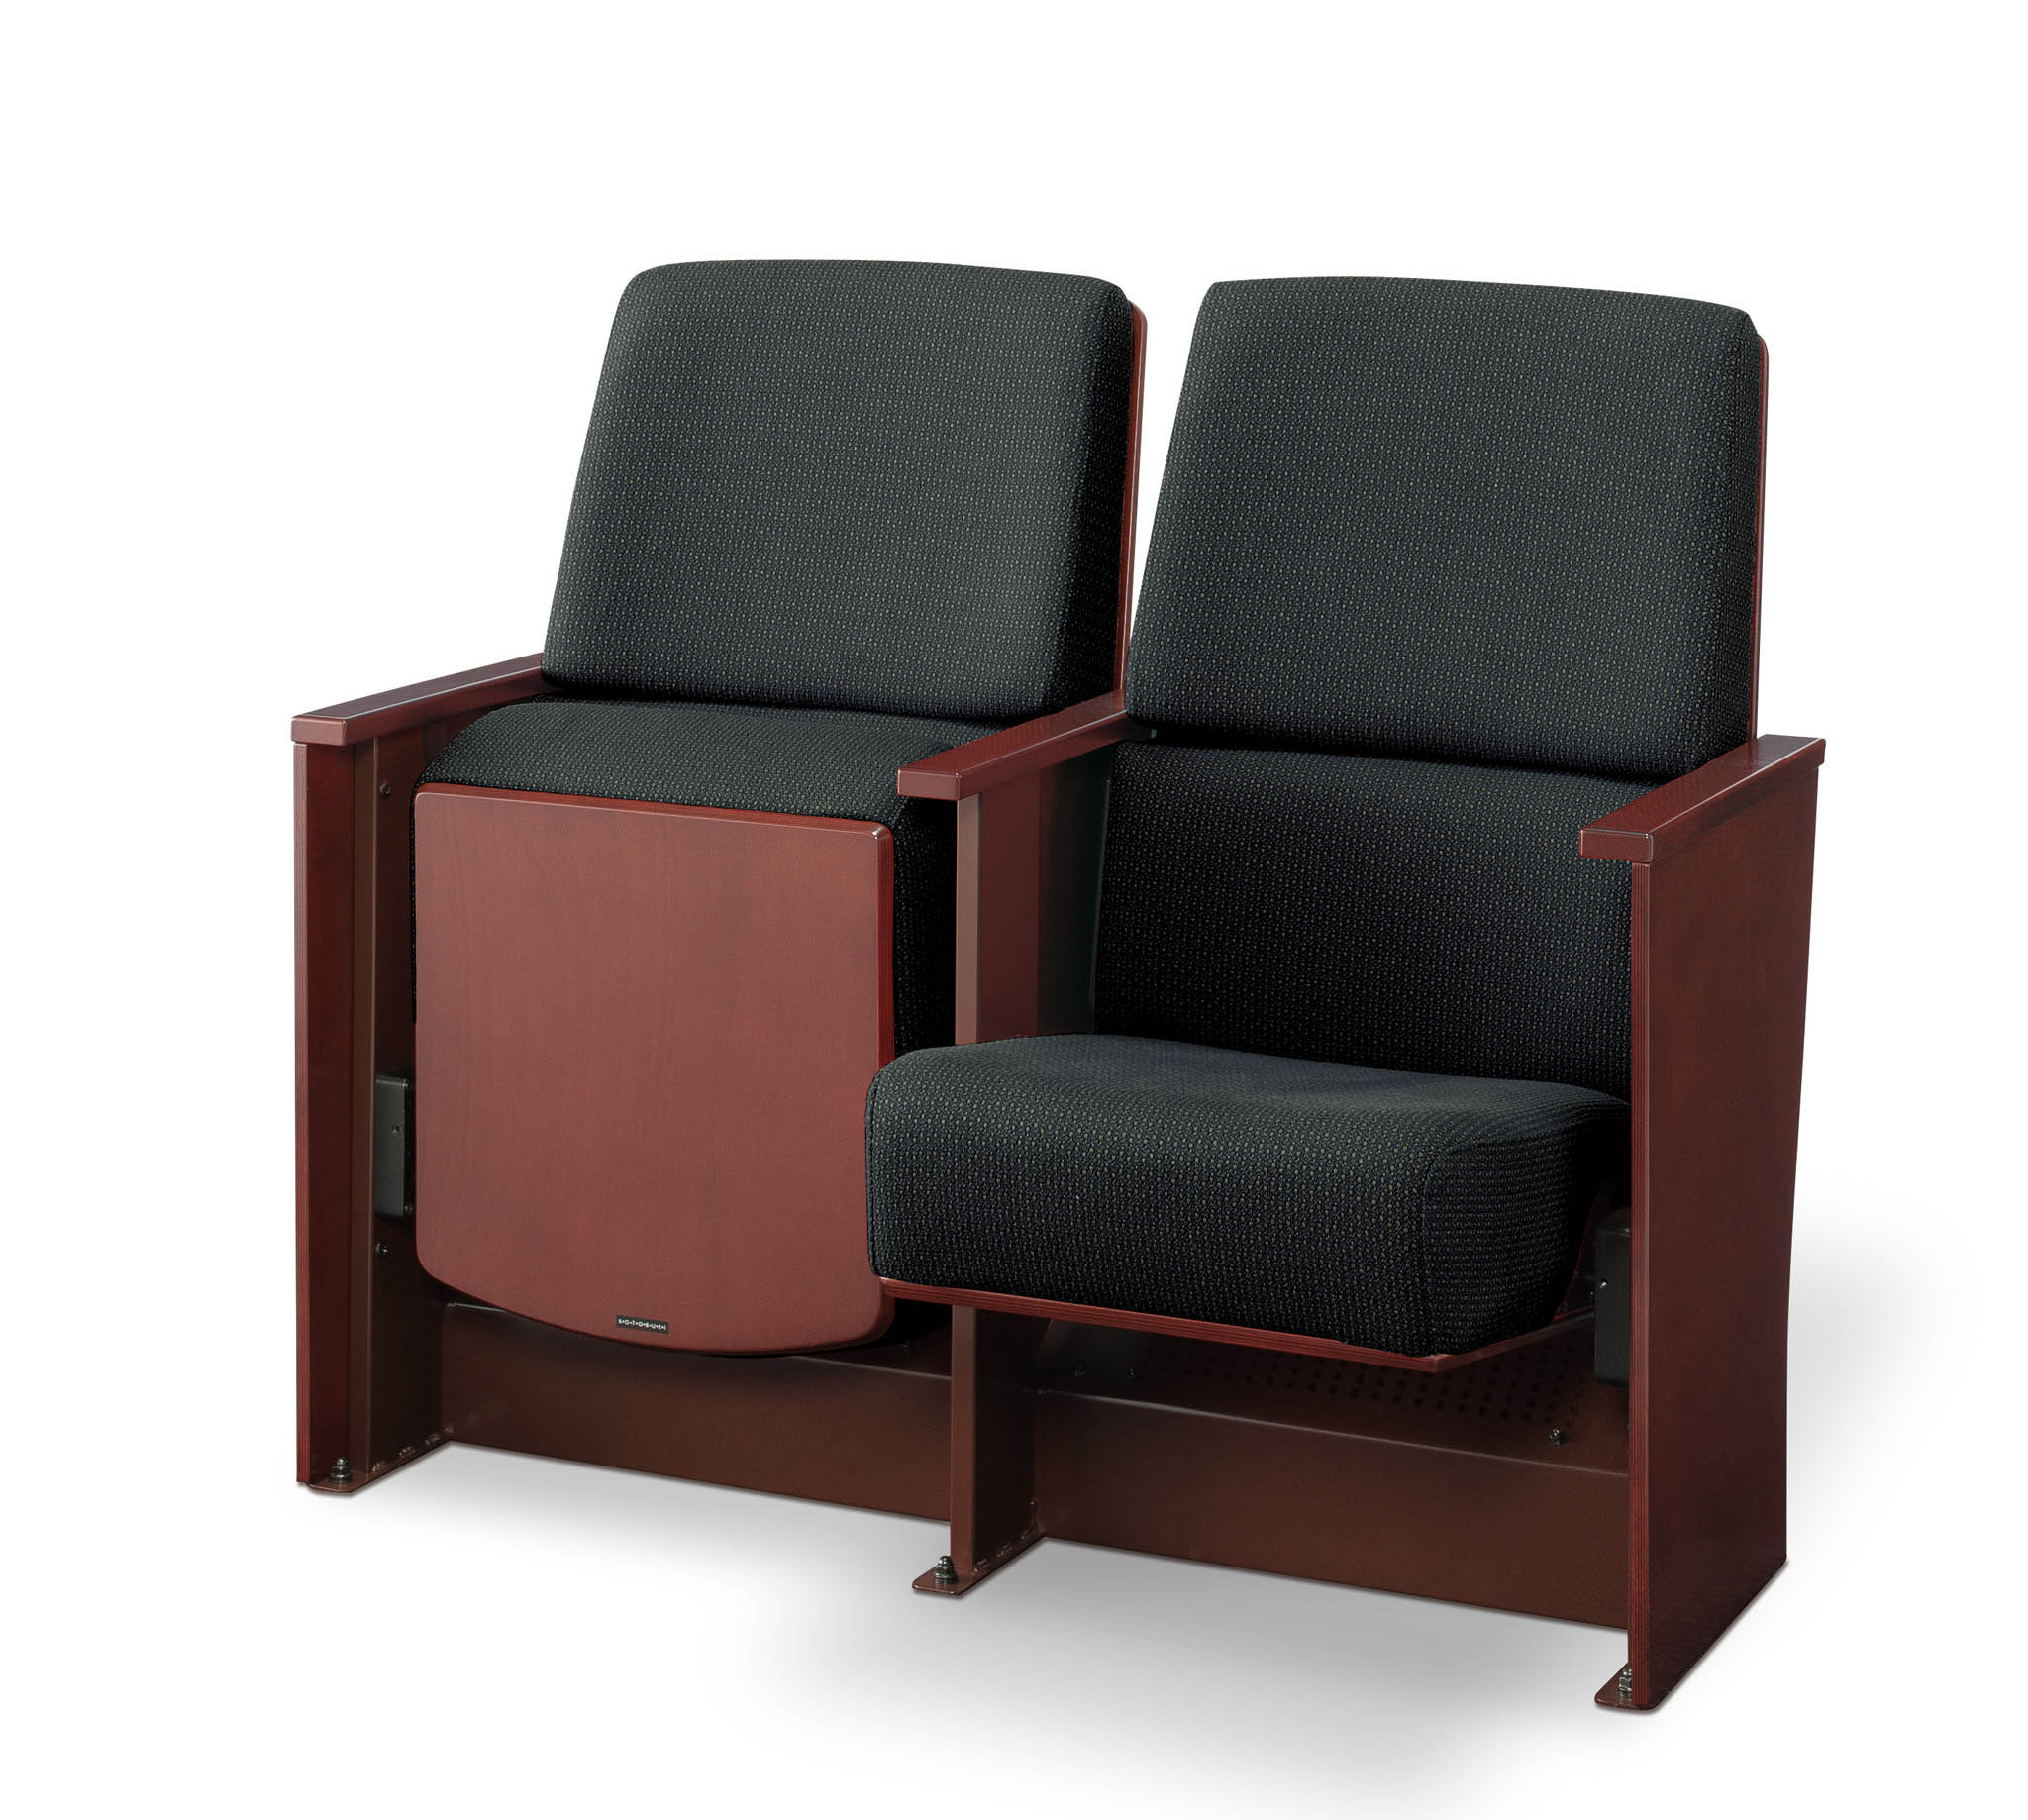 theater seating chairs with airconditioning system "myair